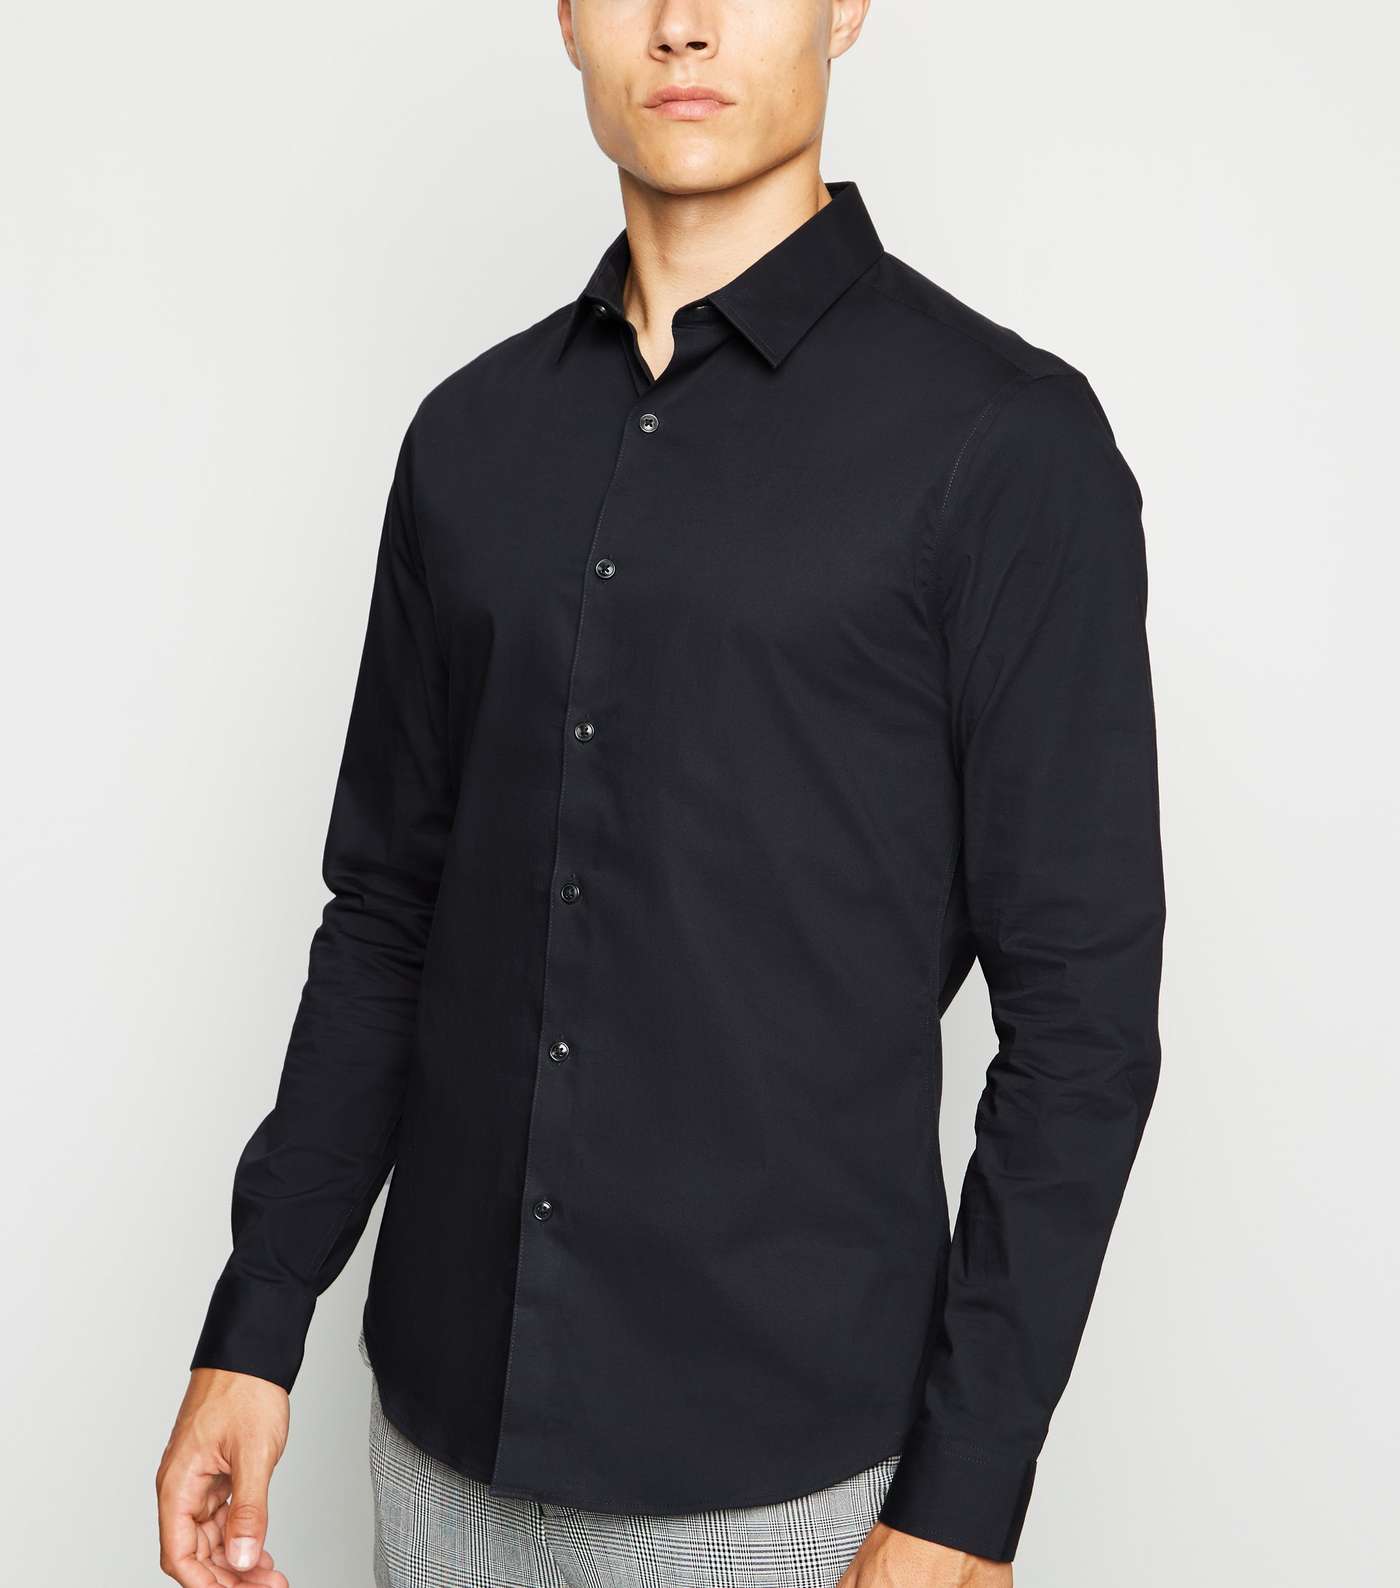 Black Long Sleeve Muscle Fit Shirt